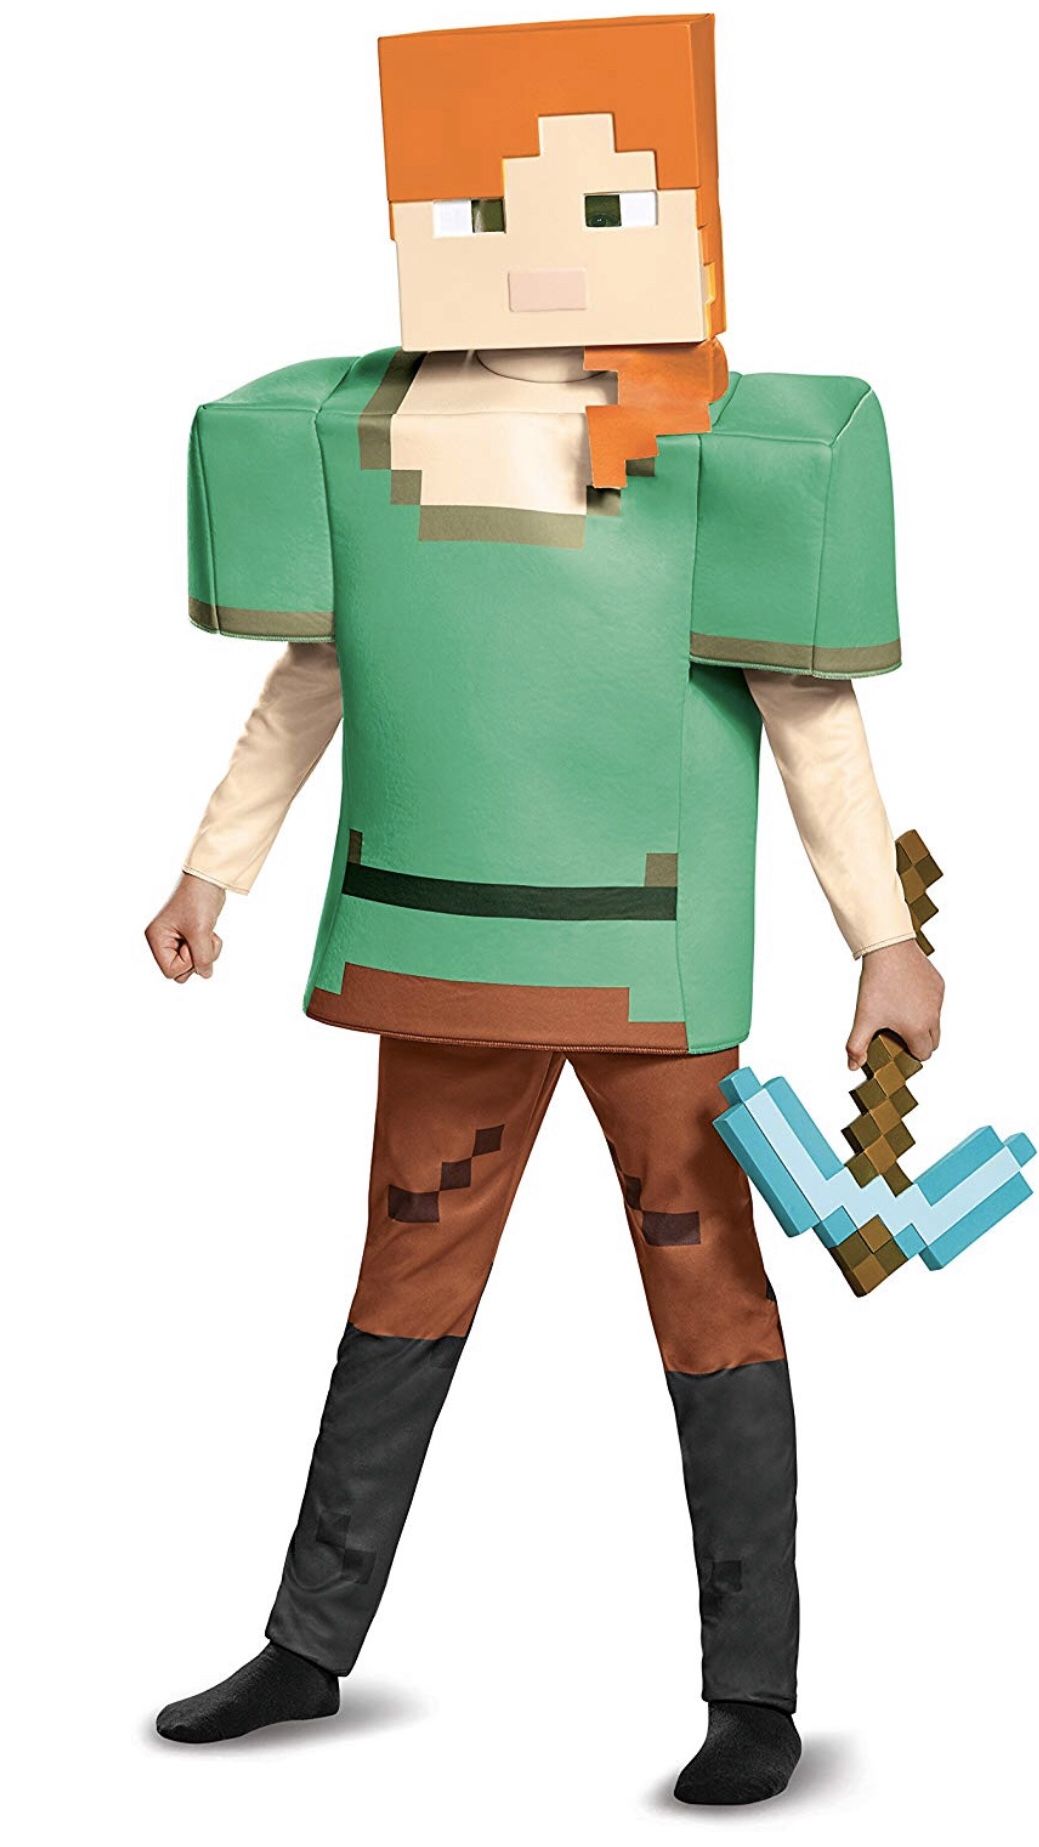 🎃 New, MINECRAFT “ALEX” Costume! Size 7-8 💥CHECK OUT MY PAGE FOR LOTS MORE HALLOWEEN COSTUMES!!!